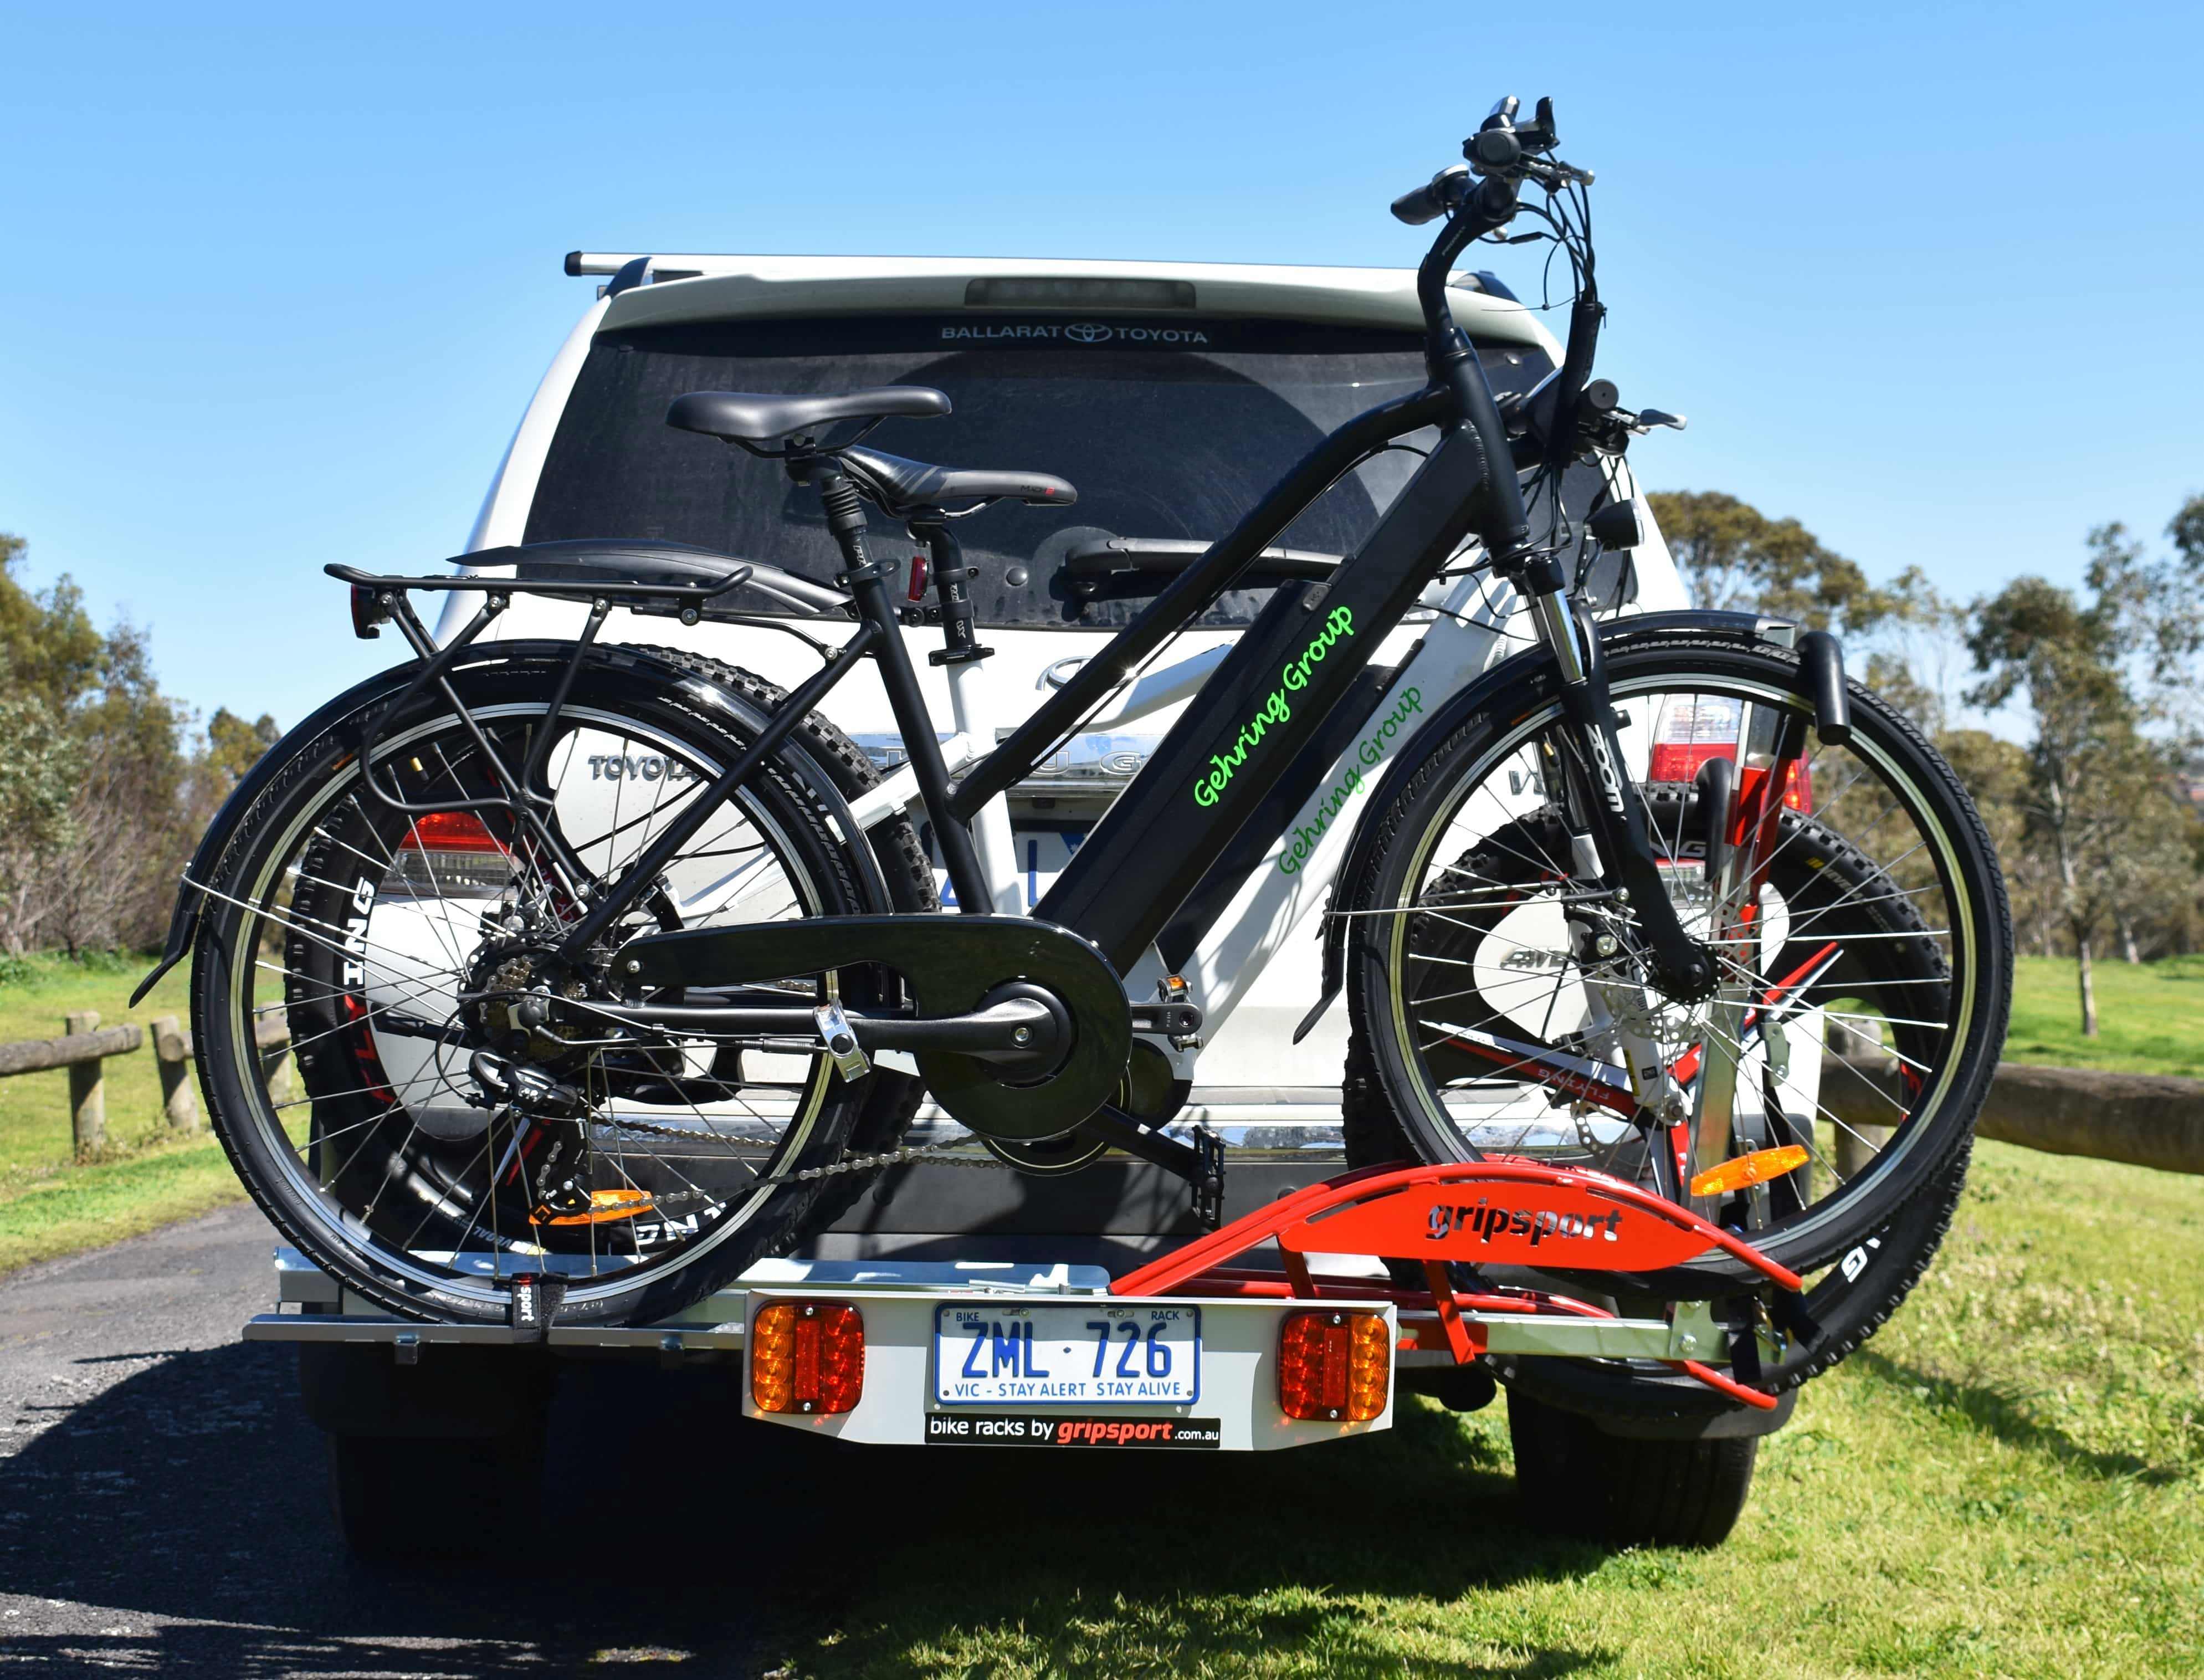 E-bike racks. Safe. Simple to load/unload. Guaranteed for life | GripSport